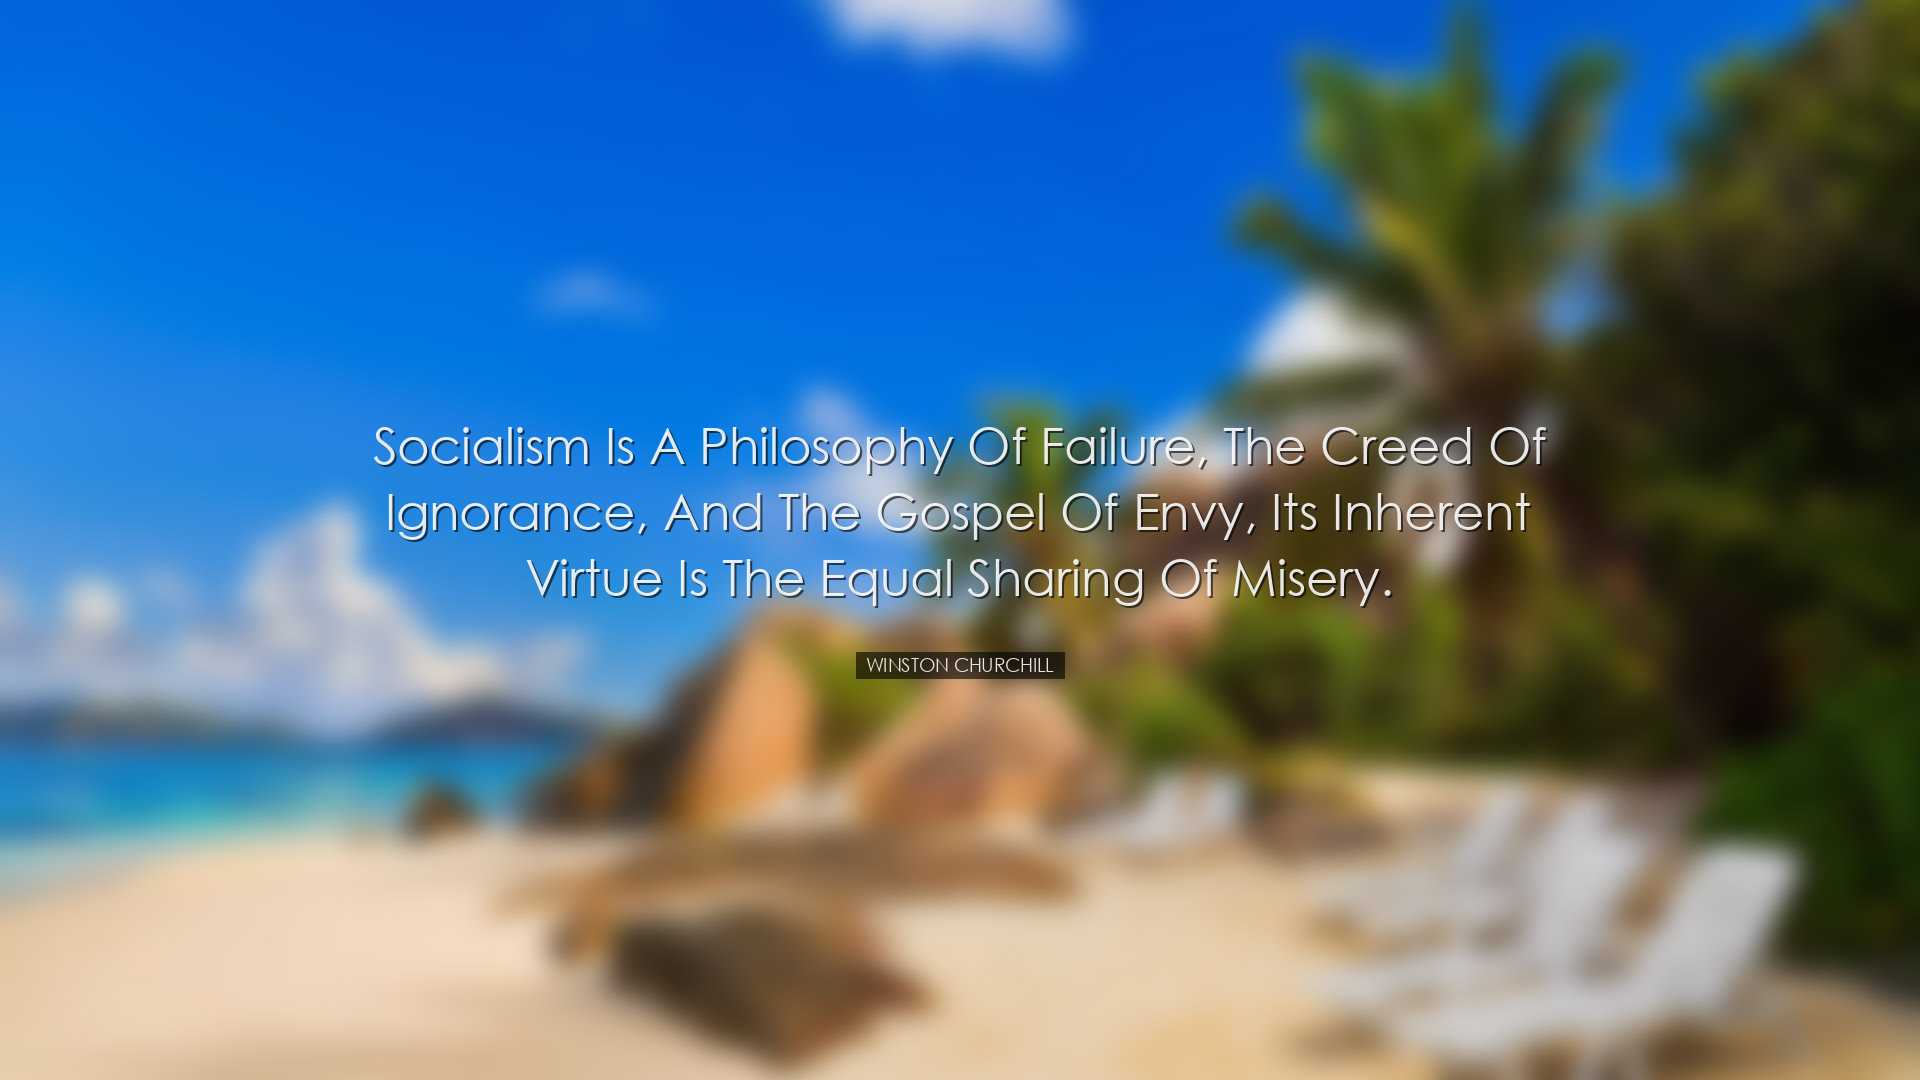 Socialism is a philosophy of failure, the creed of ignorance, and